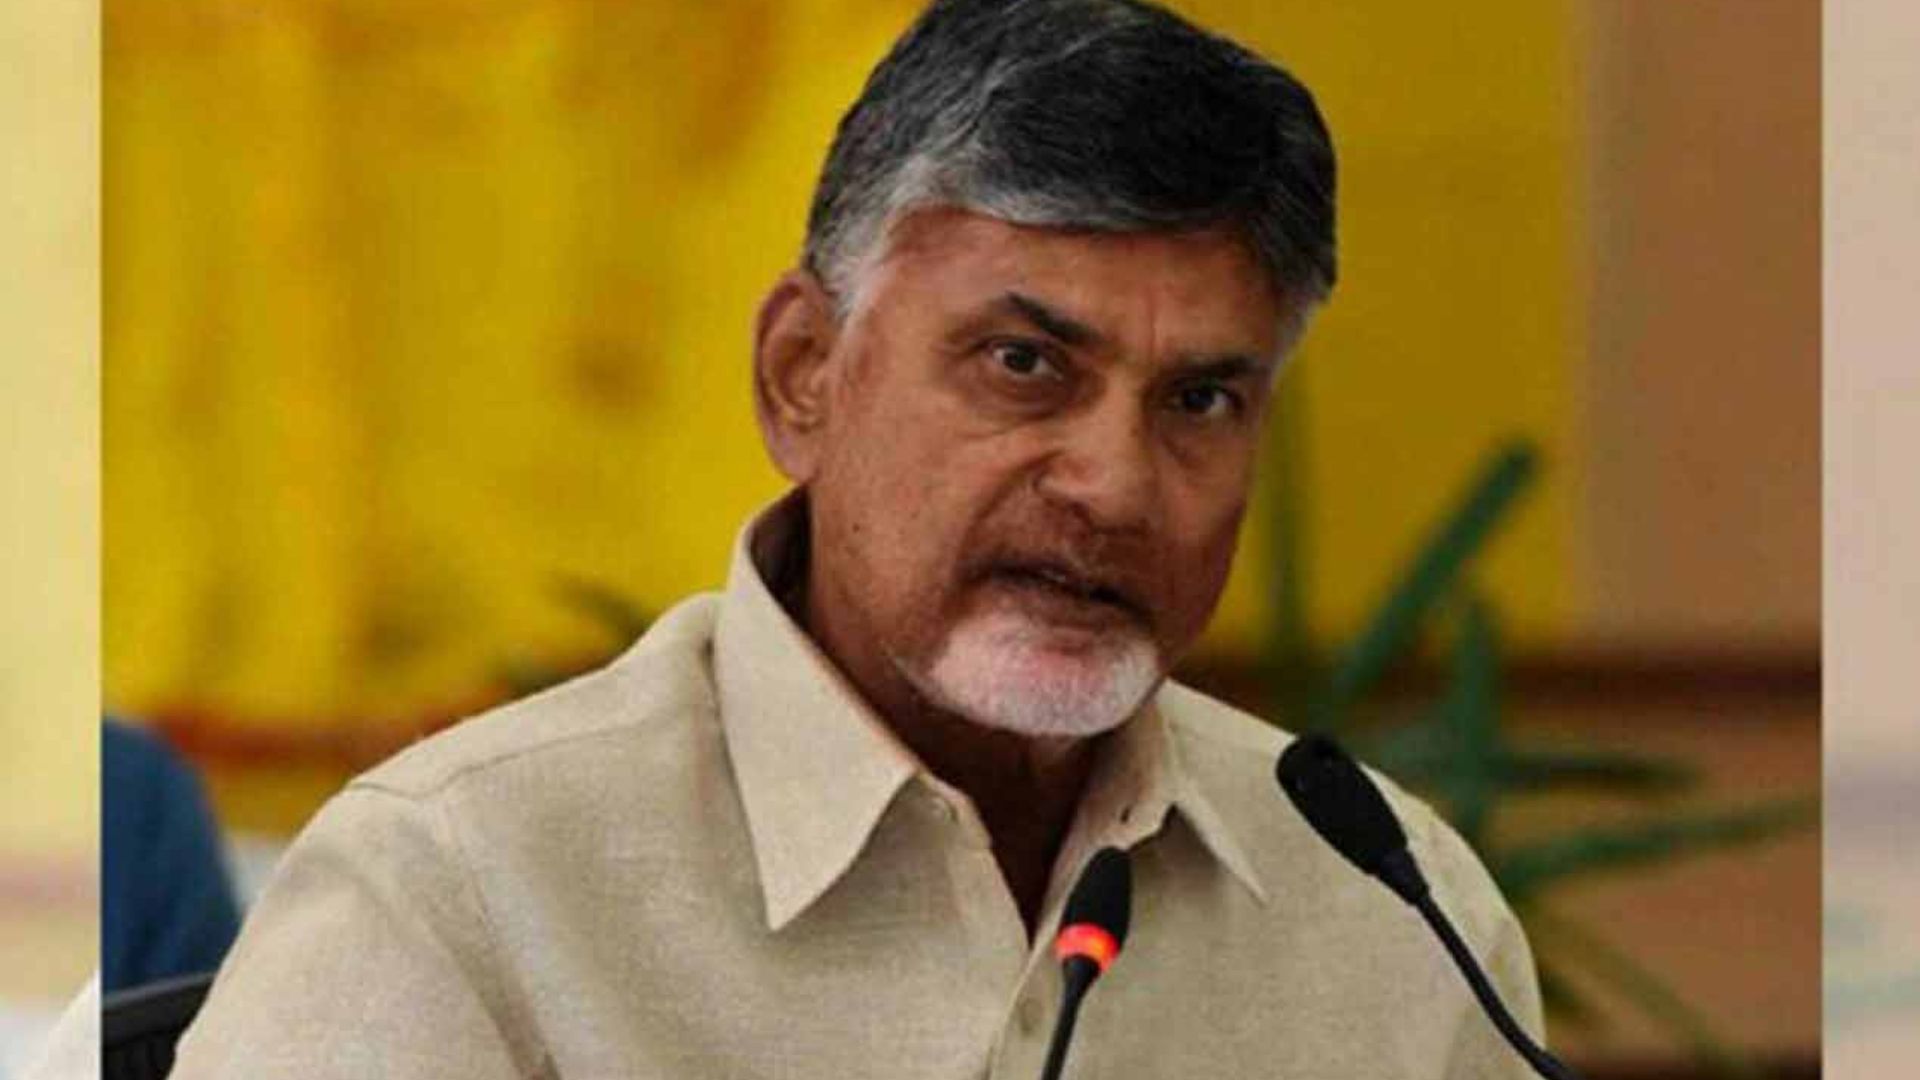 Farmers in AP suffered huge losses due to human error coupled with natural disaster: Chandrababu